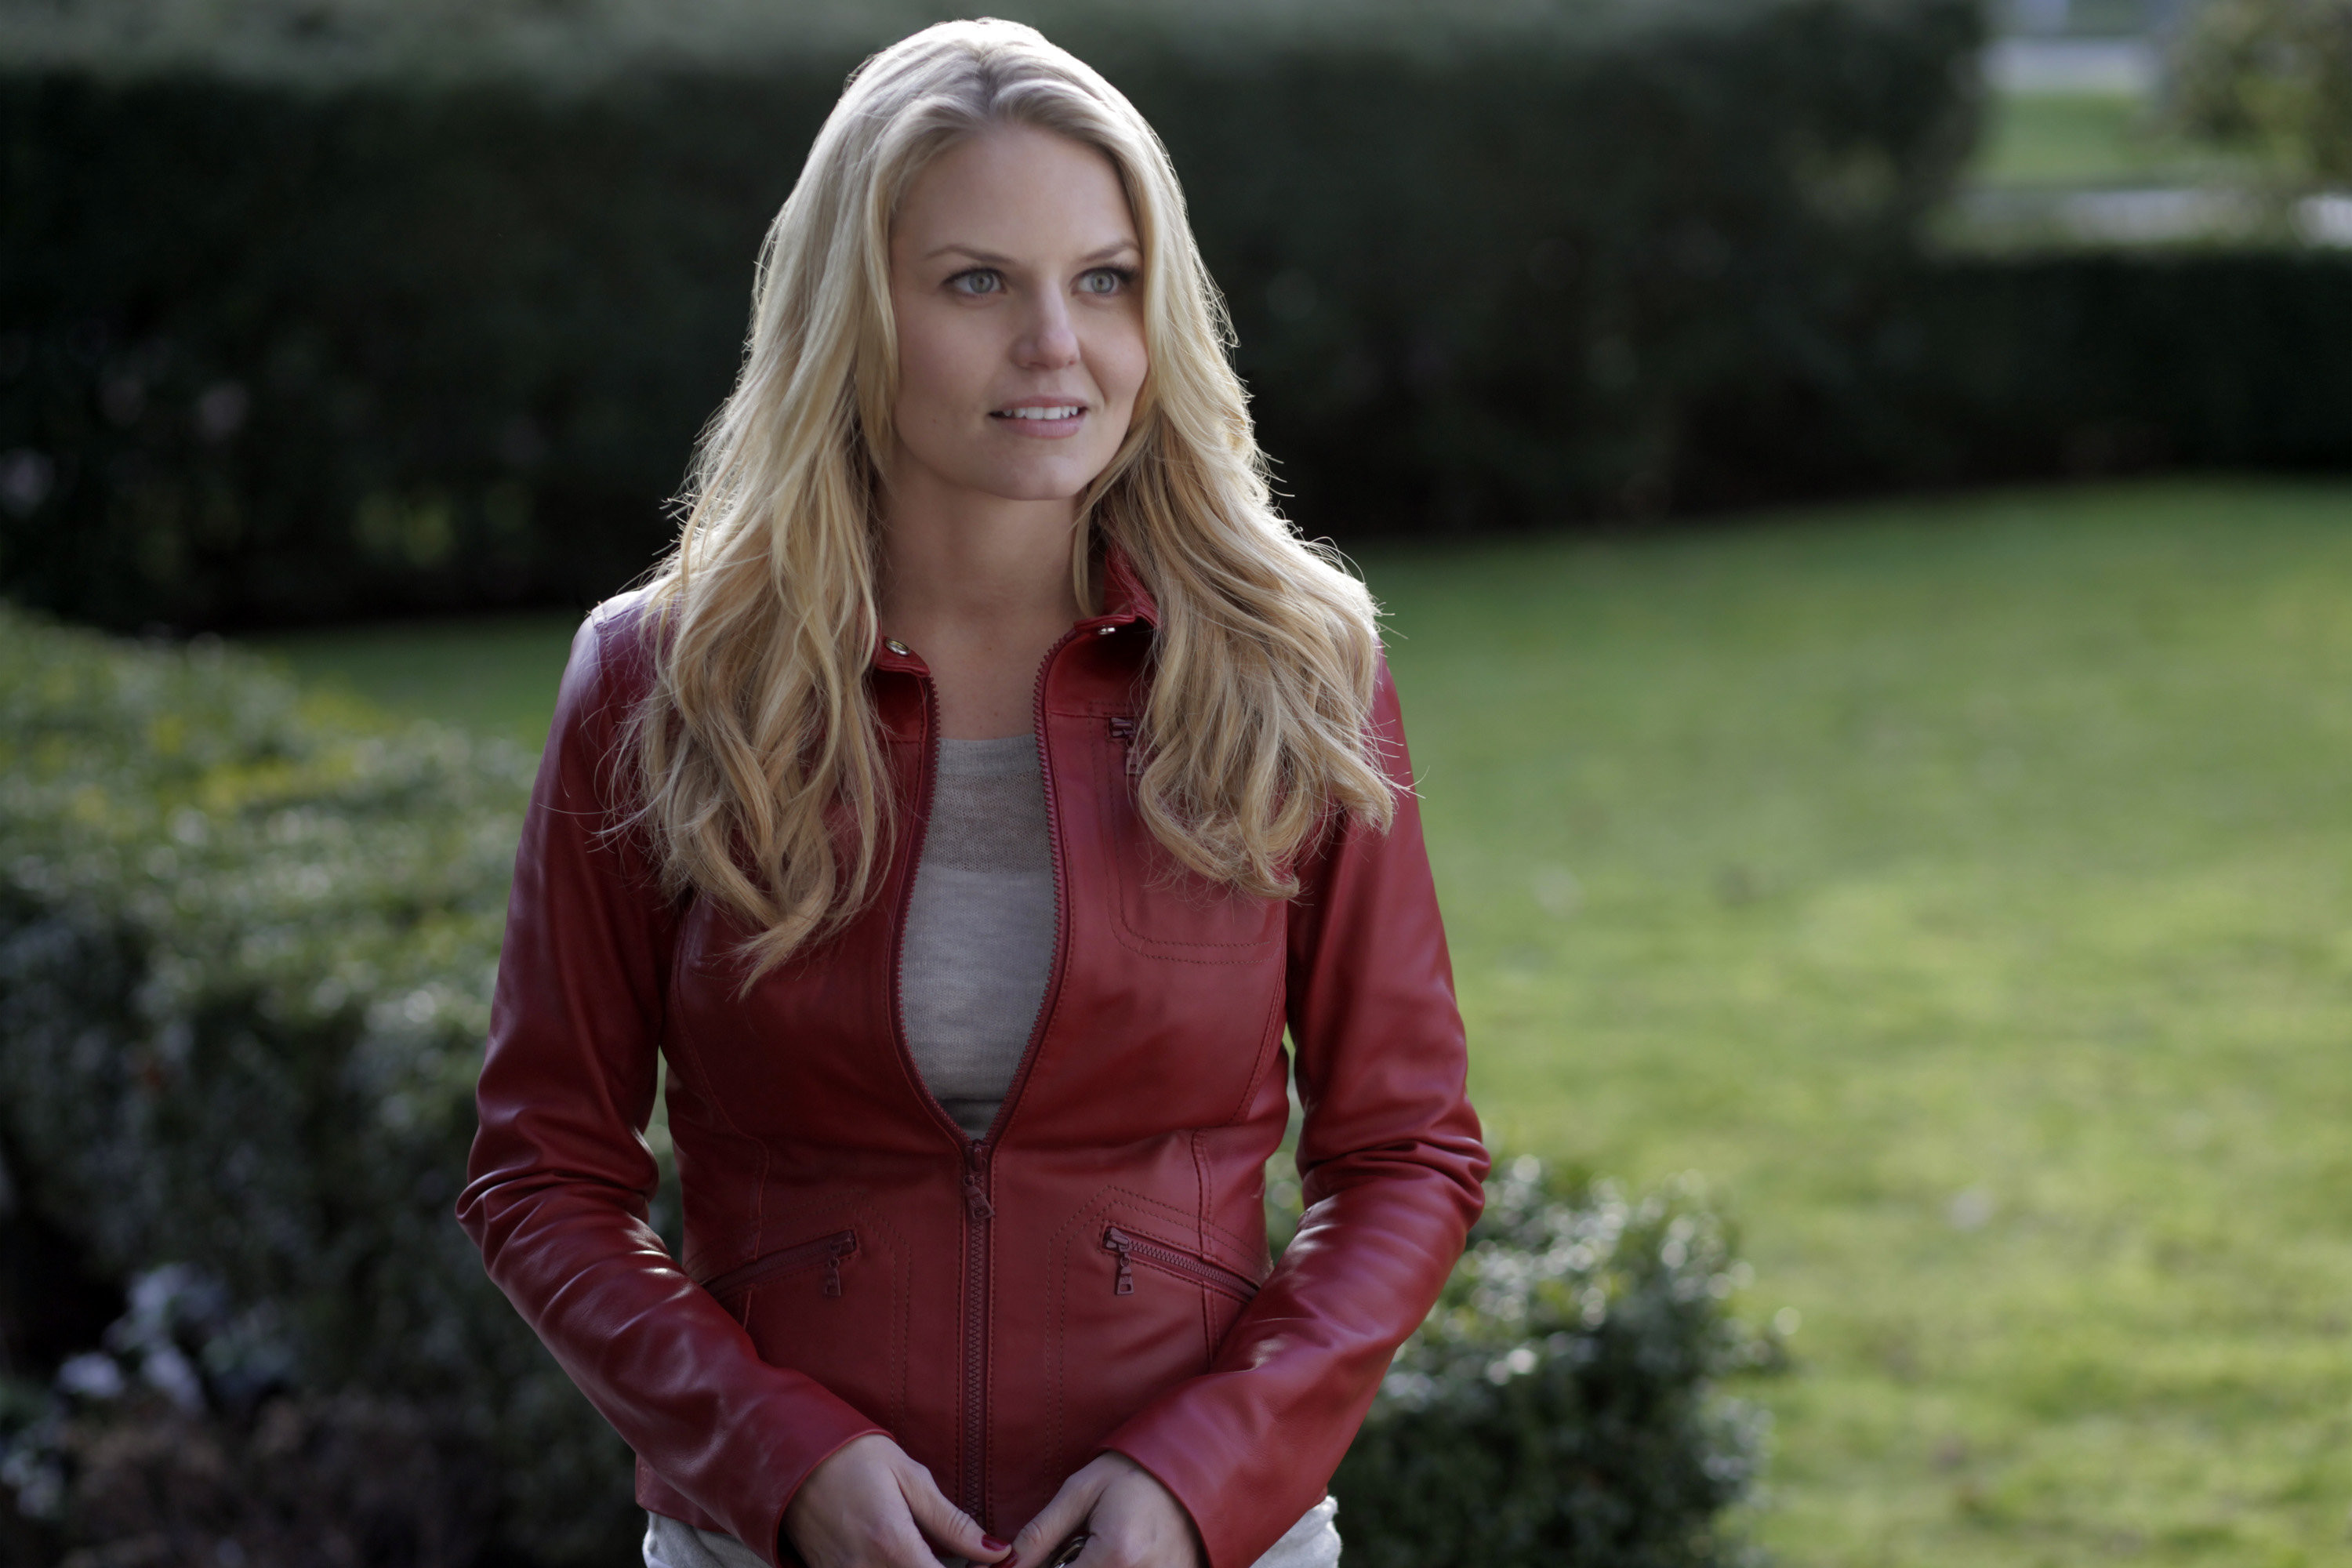 7 Easy Halloween Costumes From Once Upon A Time Once Upon A Time